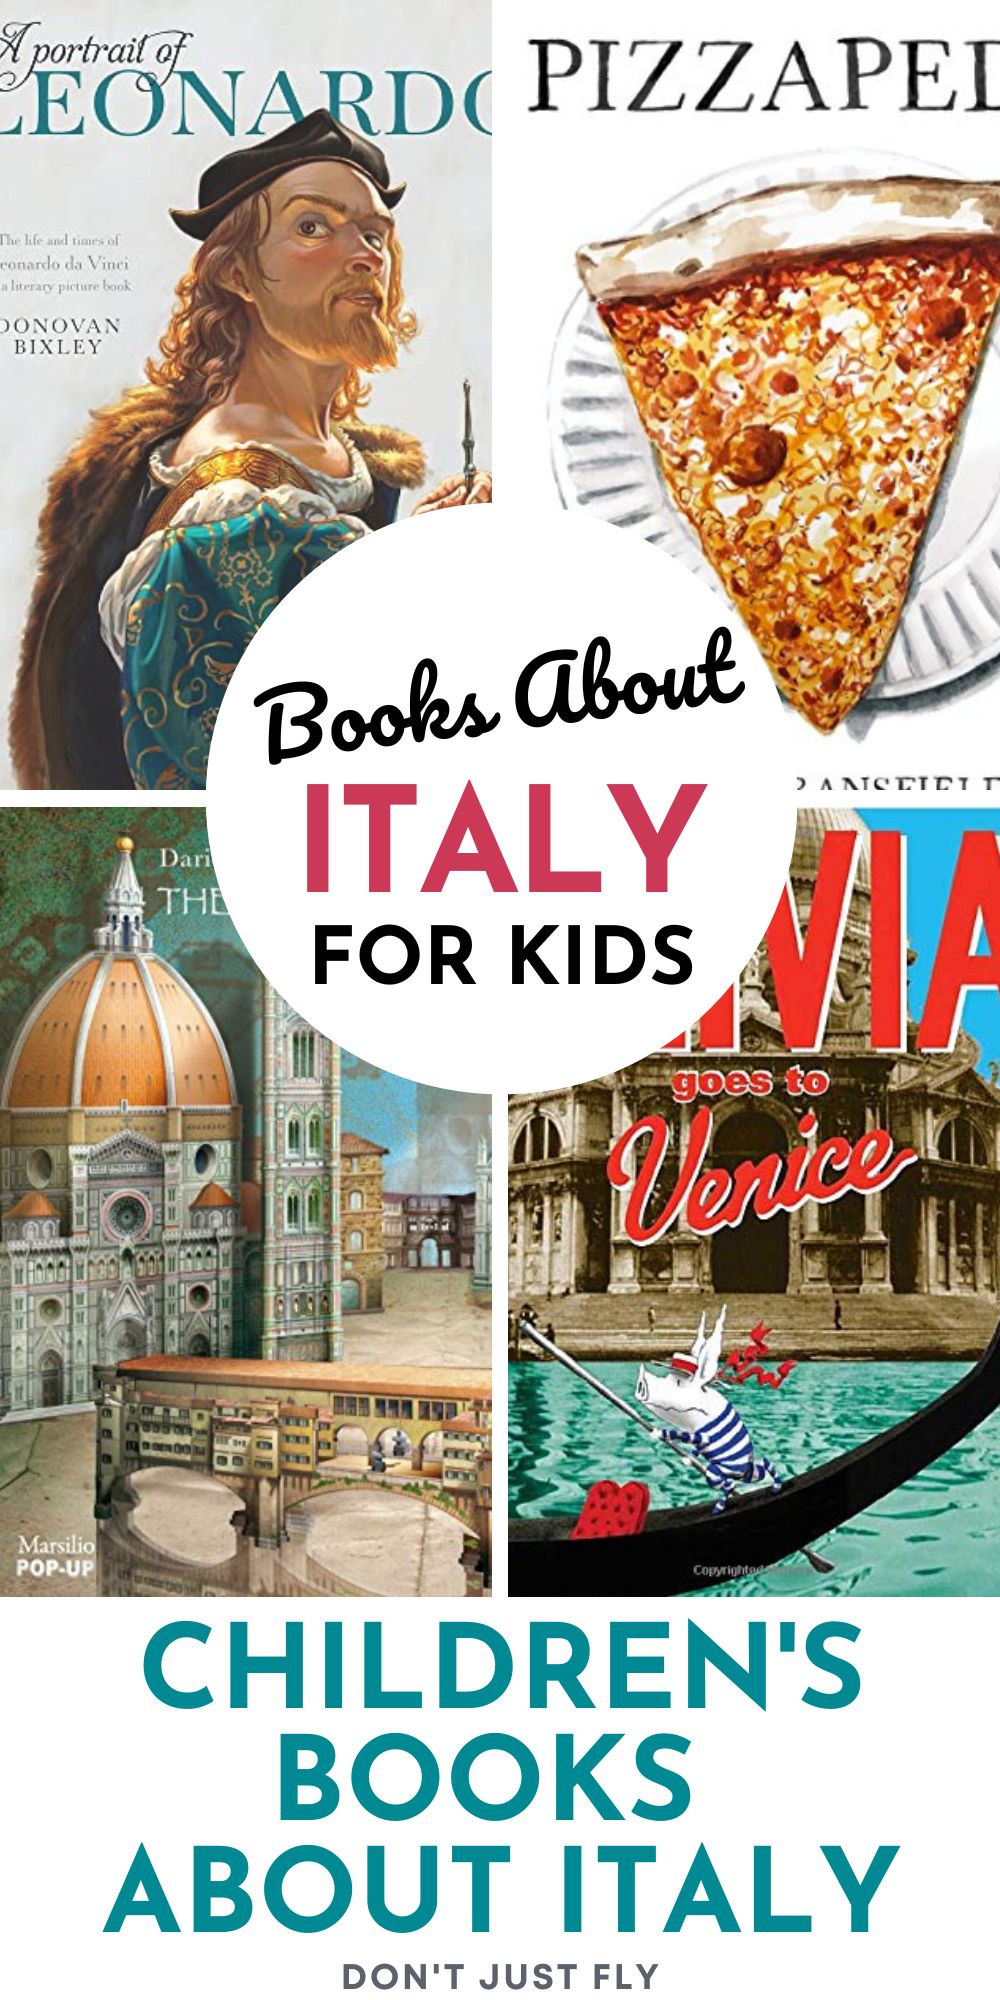 The photo collage shows several picture books about Italy.